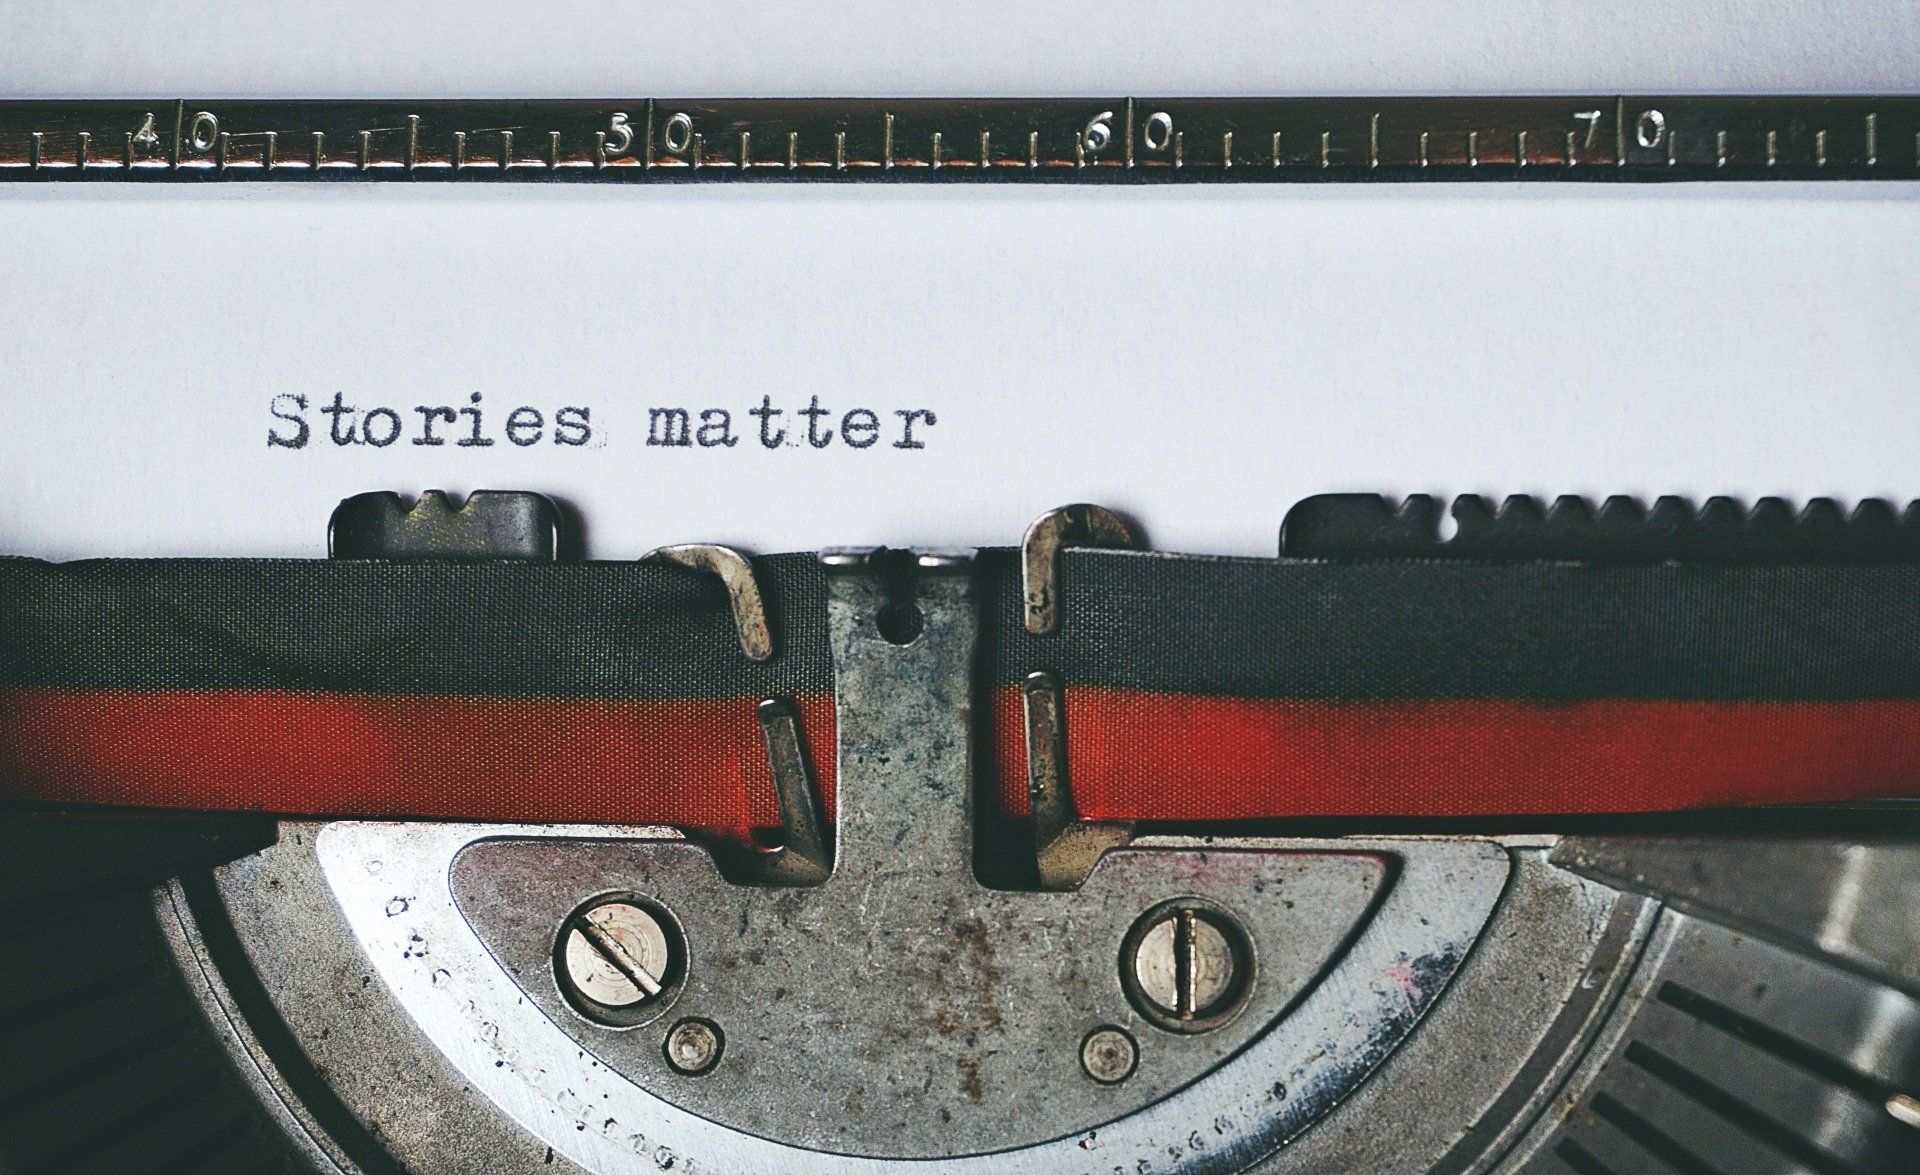 A typewriter with the words stories matter written on it